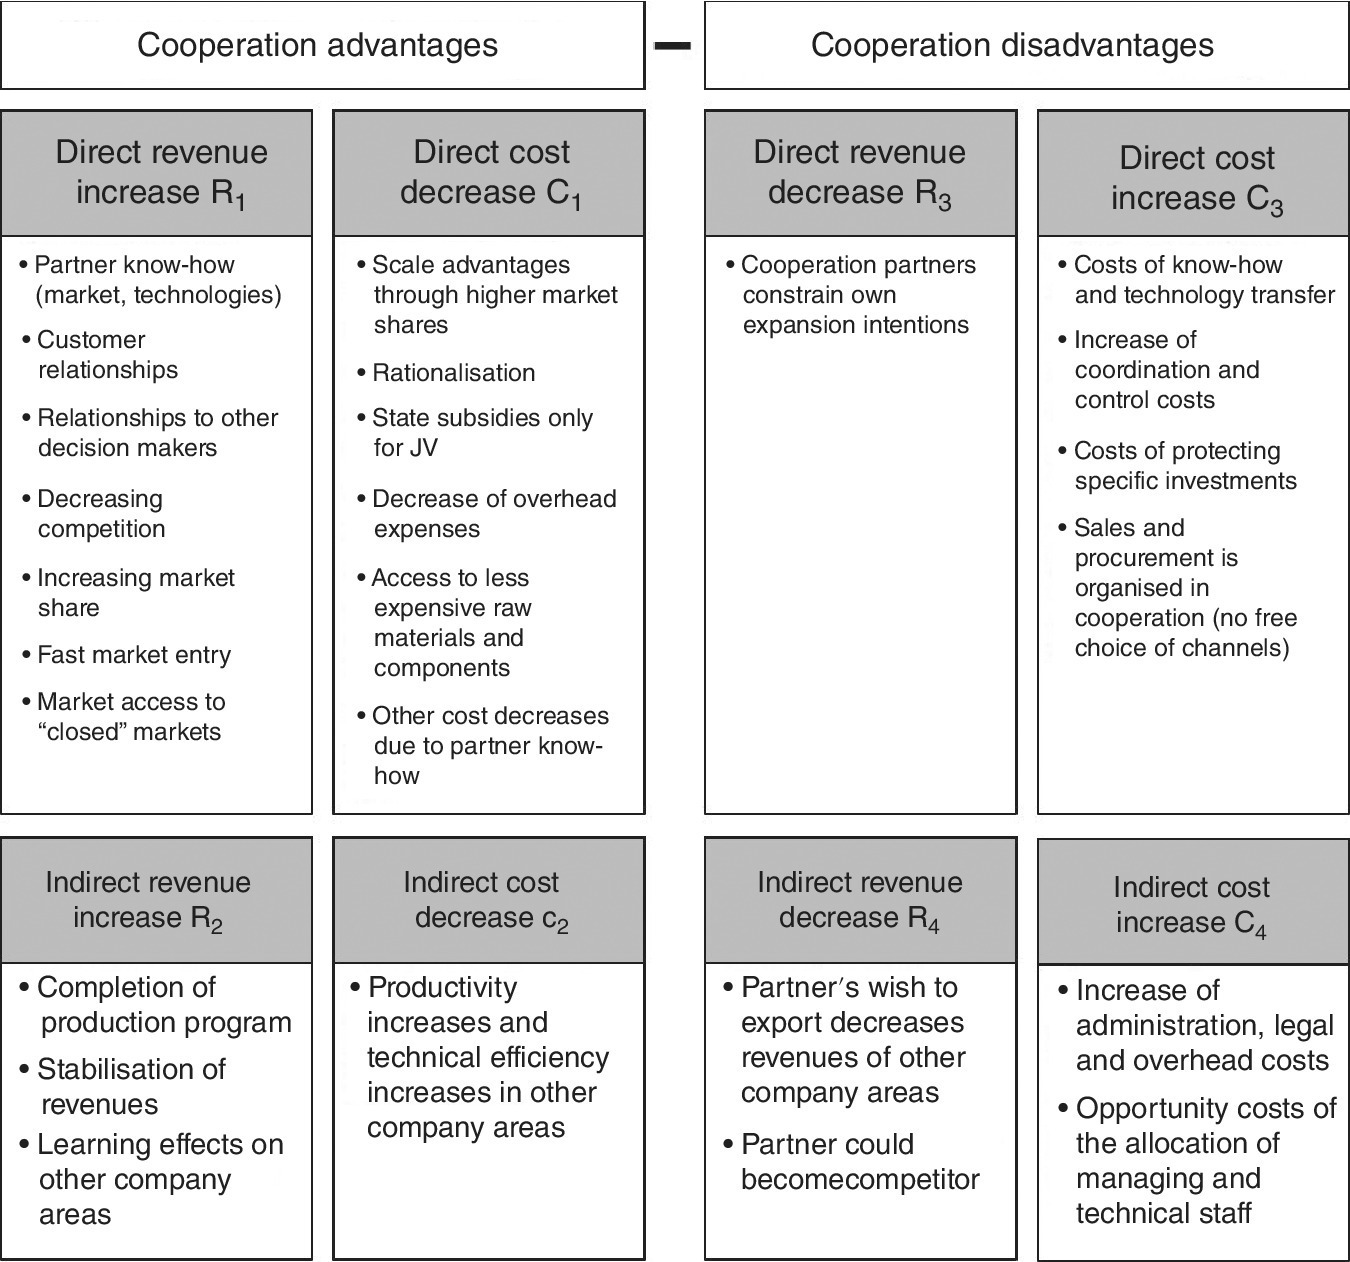 Diagram displaying boxes labeled cooperative advantages (left) and disadvantages (right) with list of corresponding effects for direct revenue, direct cost, indirect revenue, and indirect cost.